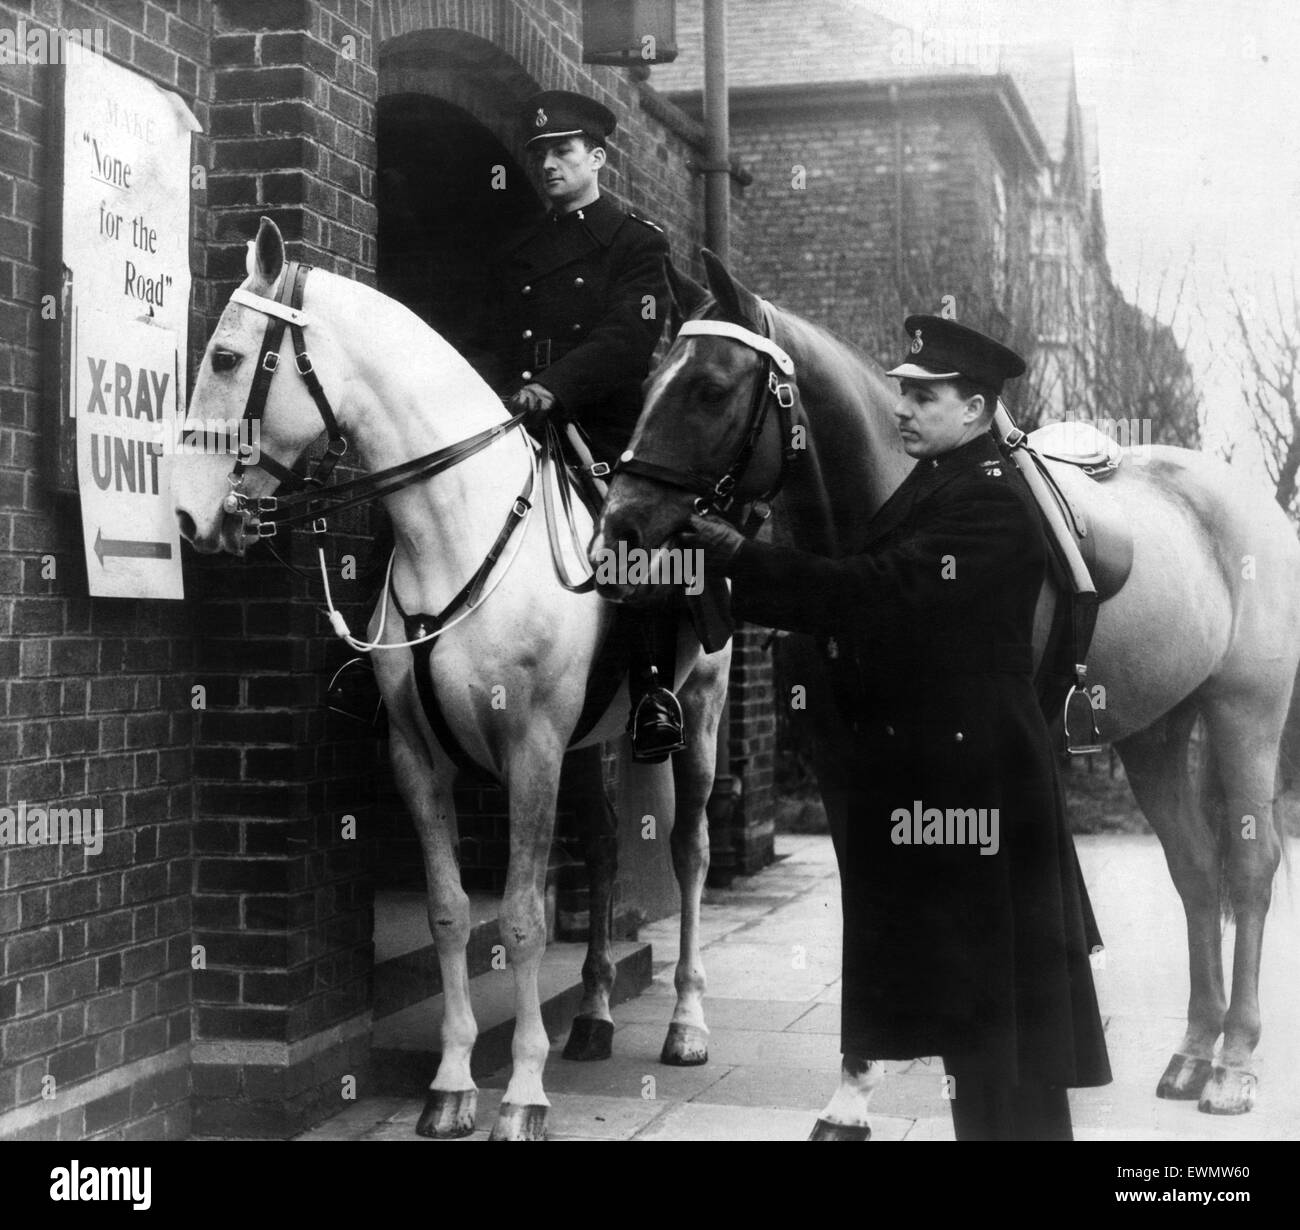 Police horses at an X-ray unit. Hobson's choice wonders what it is all about when Constable Thomas Bodessa of the Mounted Section of Liverpool City Police arrived at the X-ray unit in Mather Avenue, accompanied by Constable George Forshaw on Fair Play. 20 Stock Photo